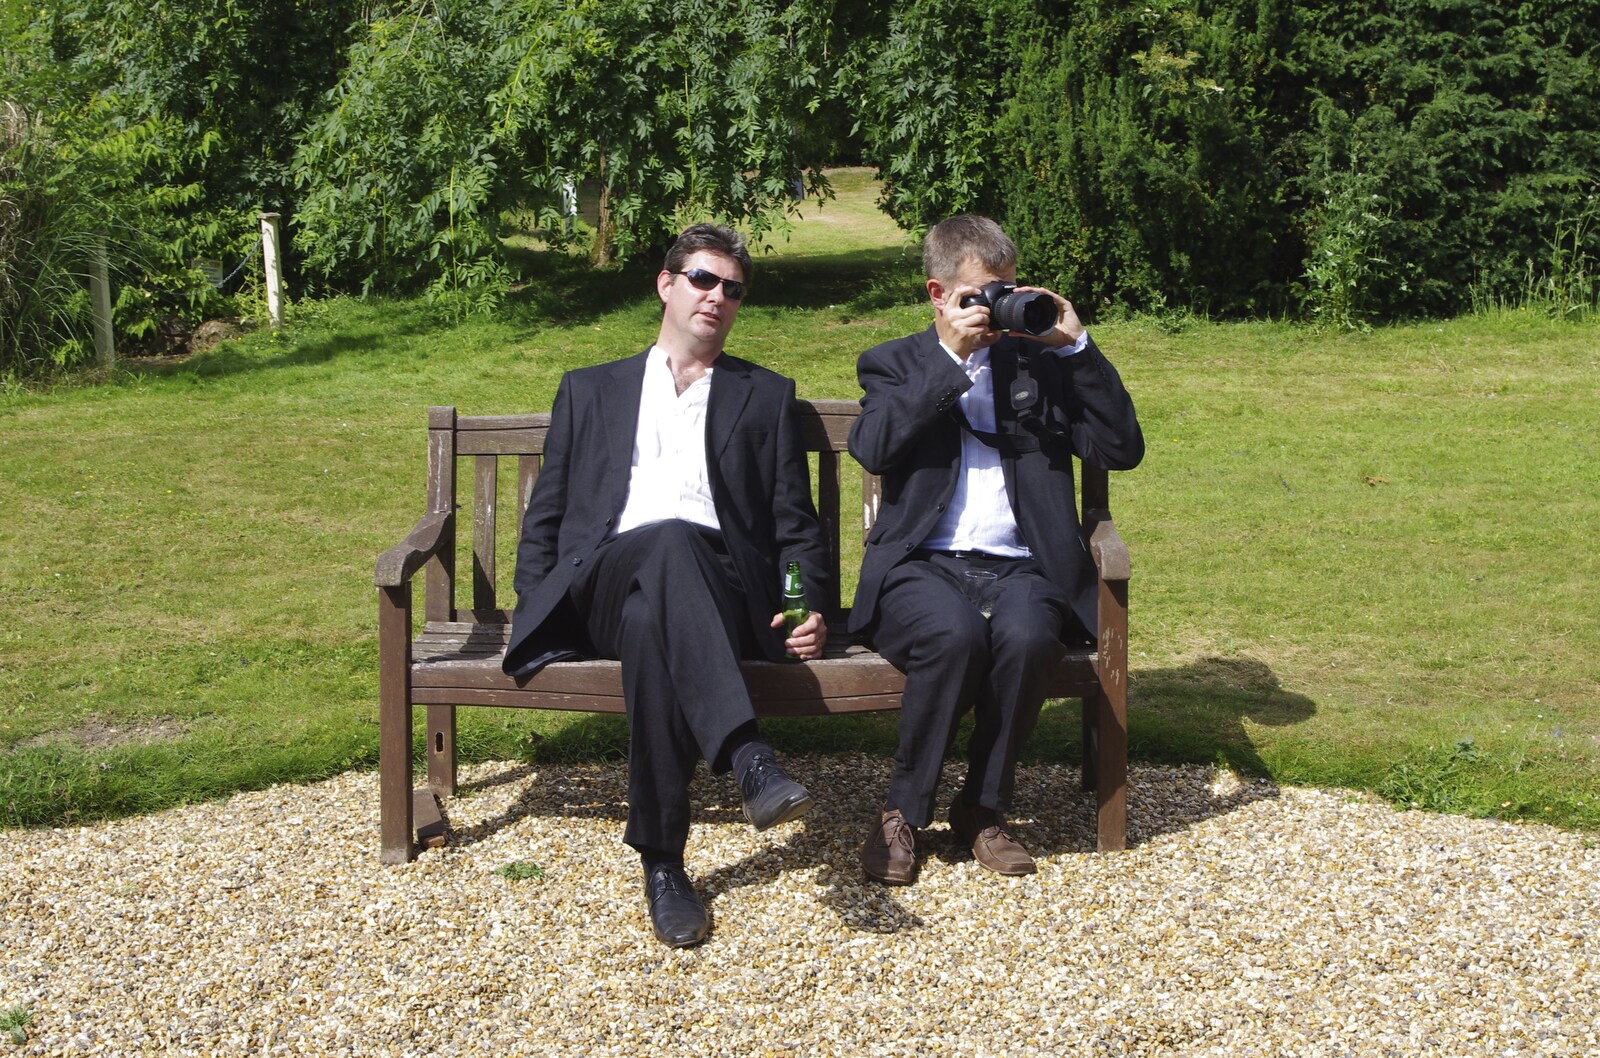 Sean and Nosher on a bench from Nosher and Isobel's Wedding, Brome, Suffolk - 3rd July 2010